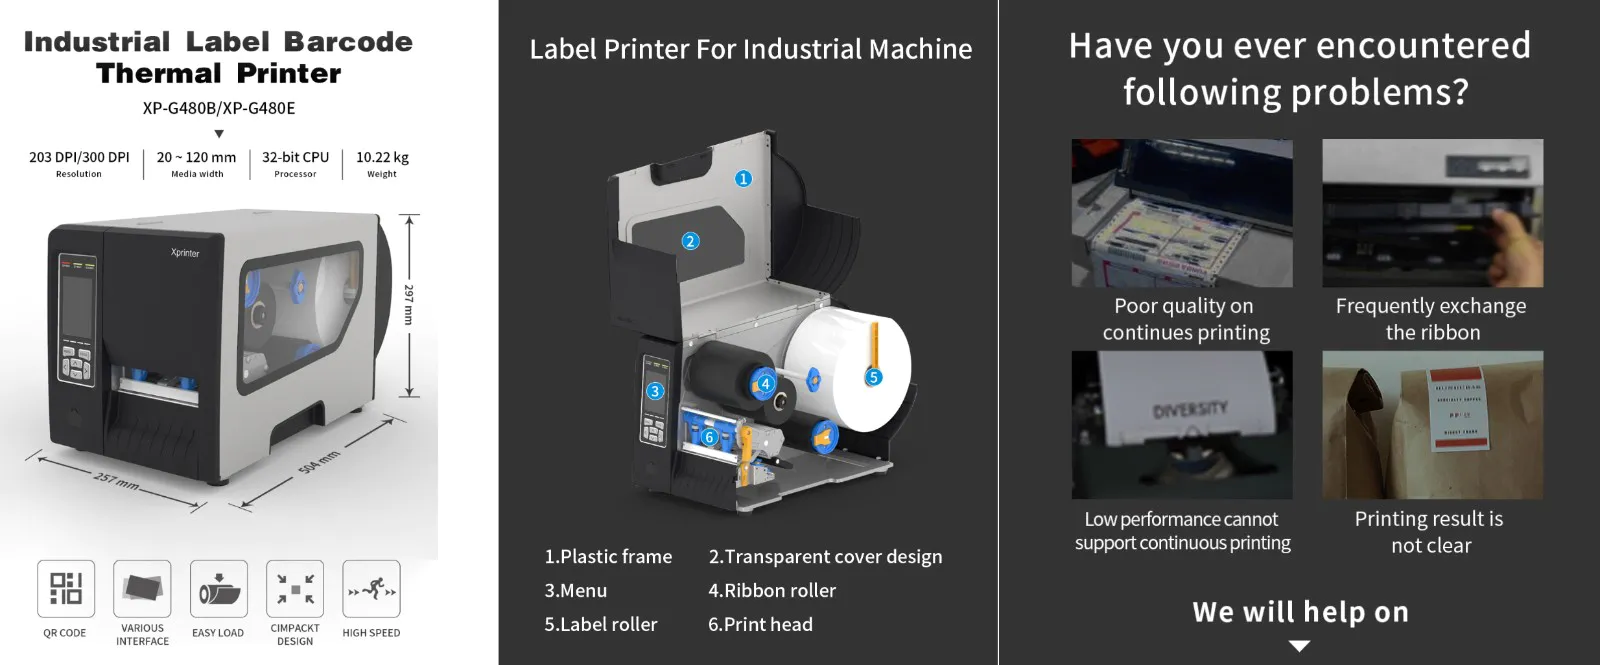 Xprinter direct thermal label printer factory for store